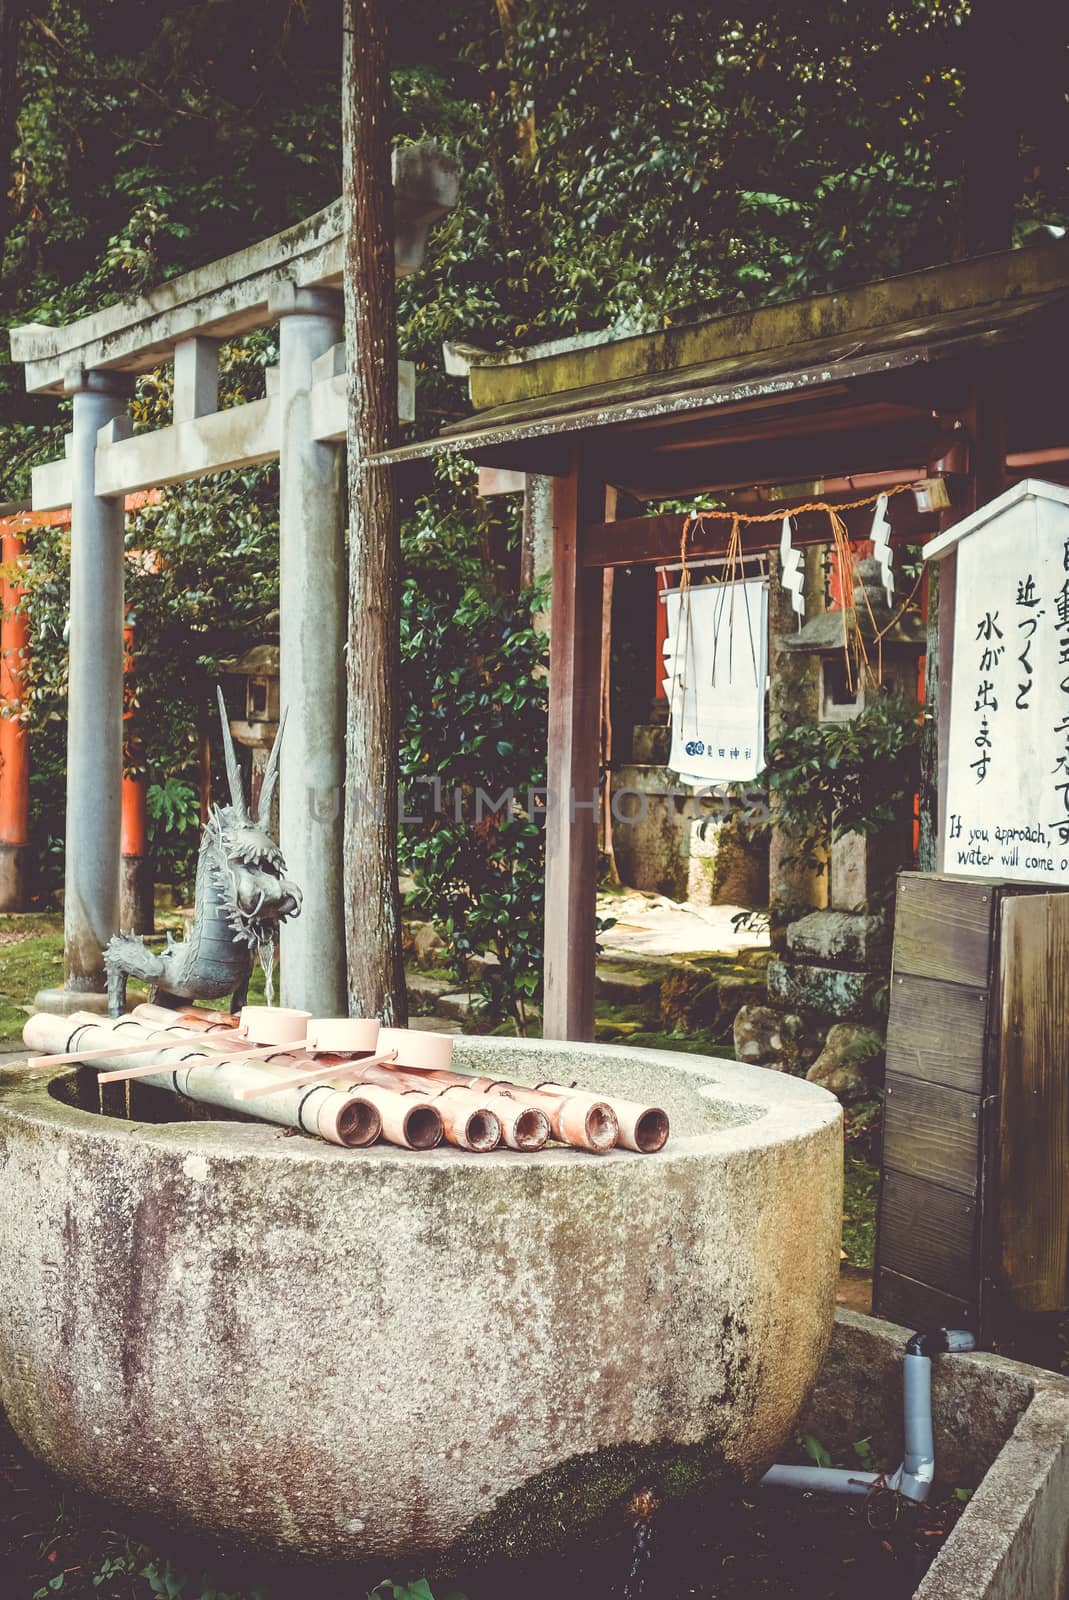 Purification fountain at shoren-in temple, Kyoto, Japan by daboost